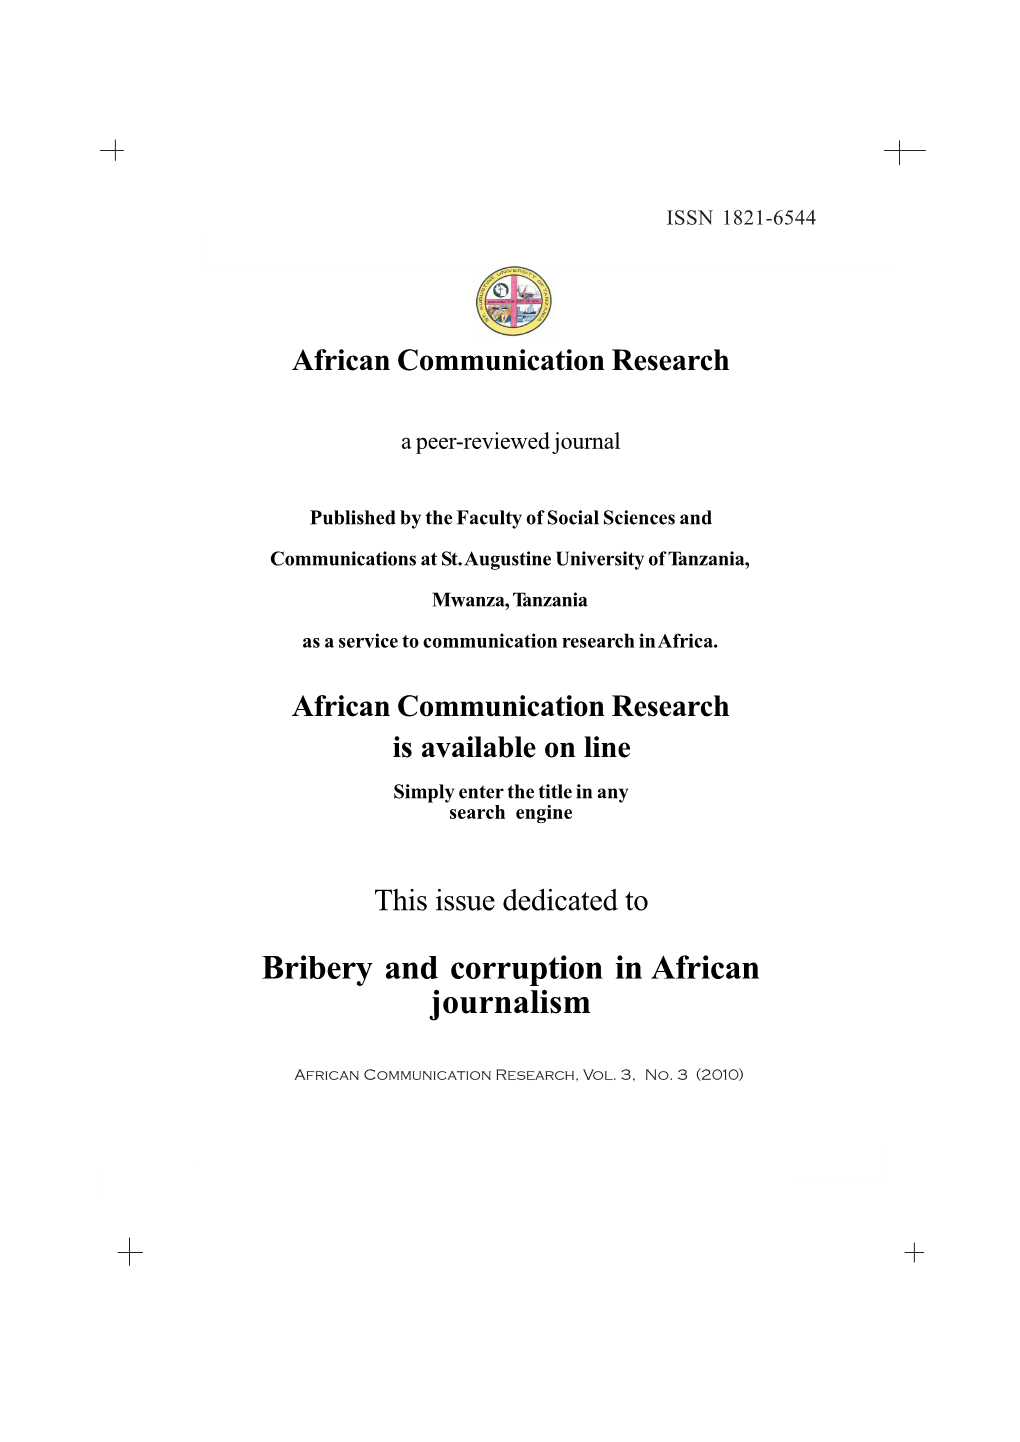 Bribery and Corruption in African Journalism.Pdf